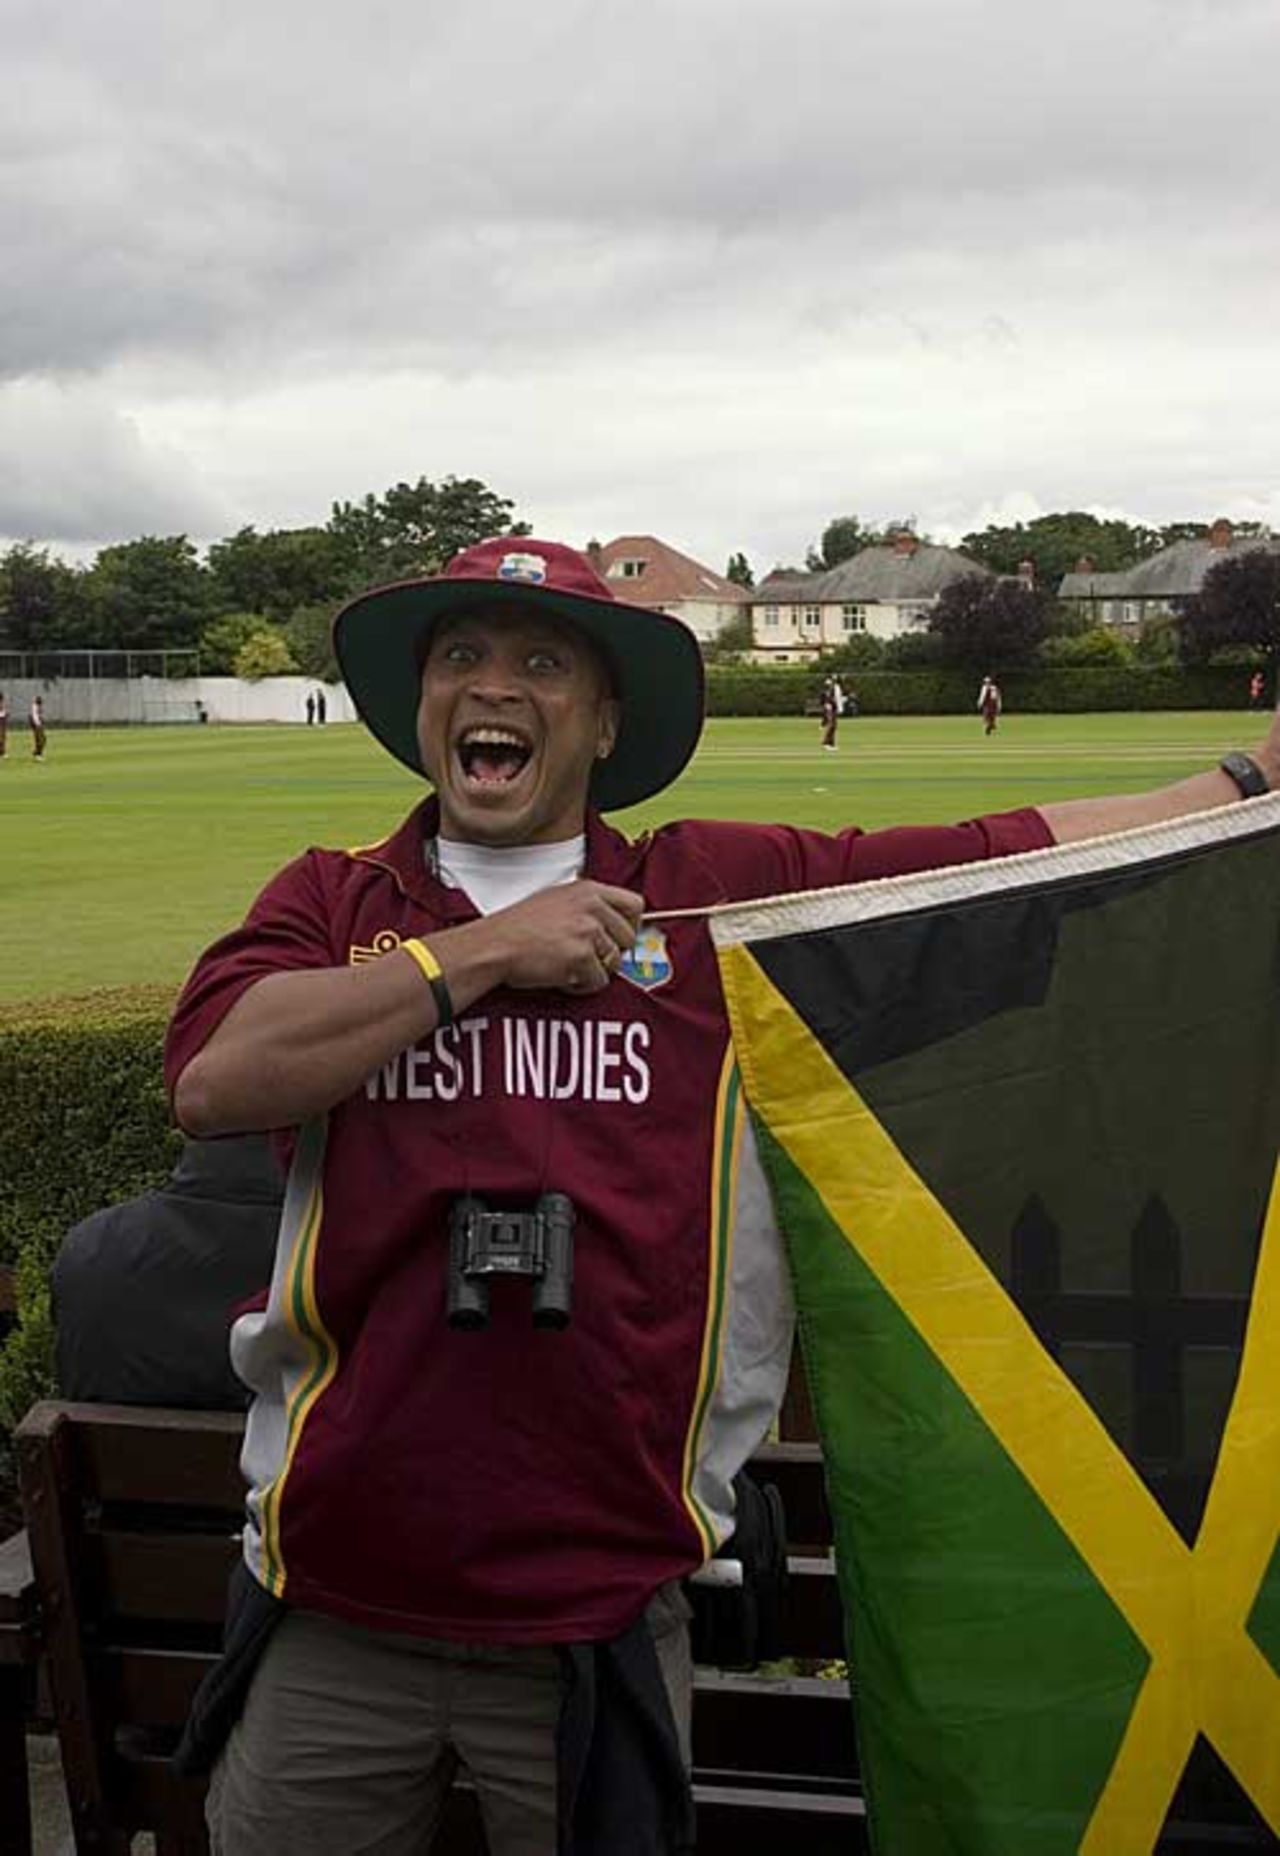 A West Indian supporter enjoys the cricket at Clontarf, Netherlands v West Indies, Clontarf, July 10